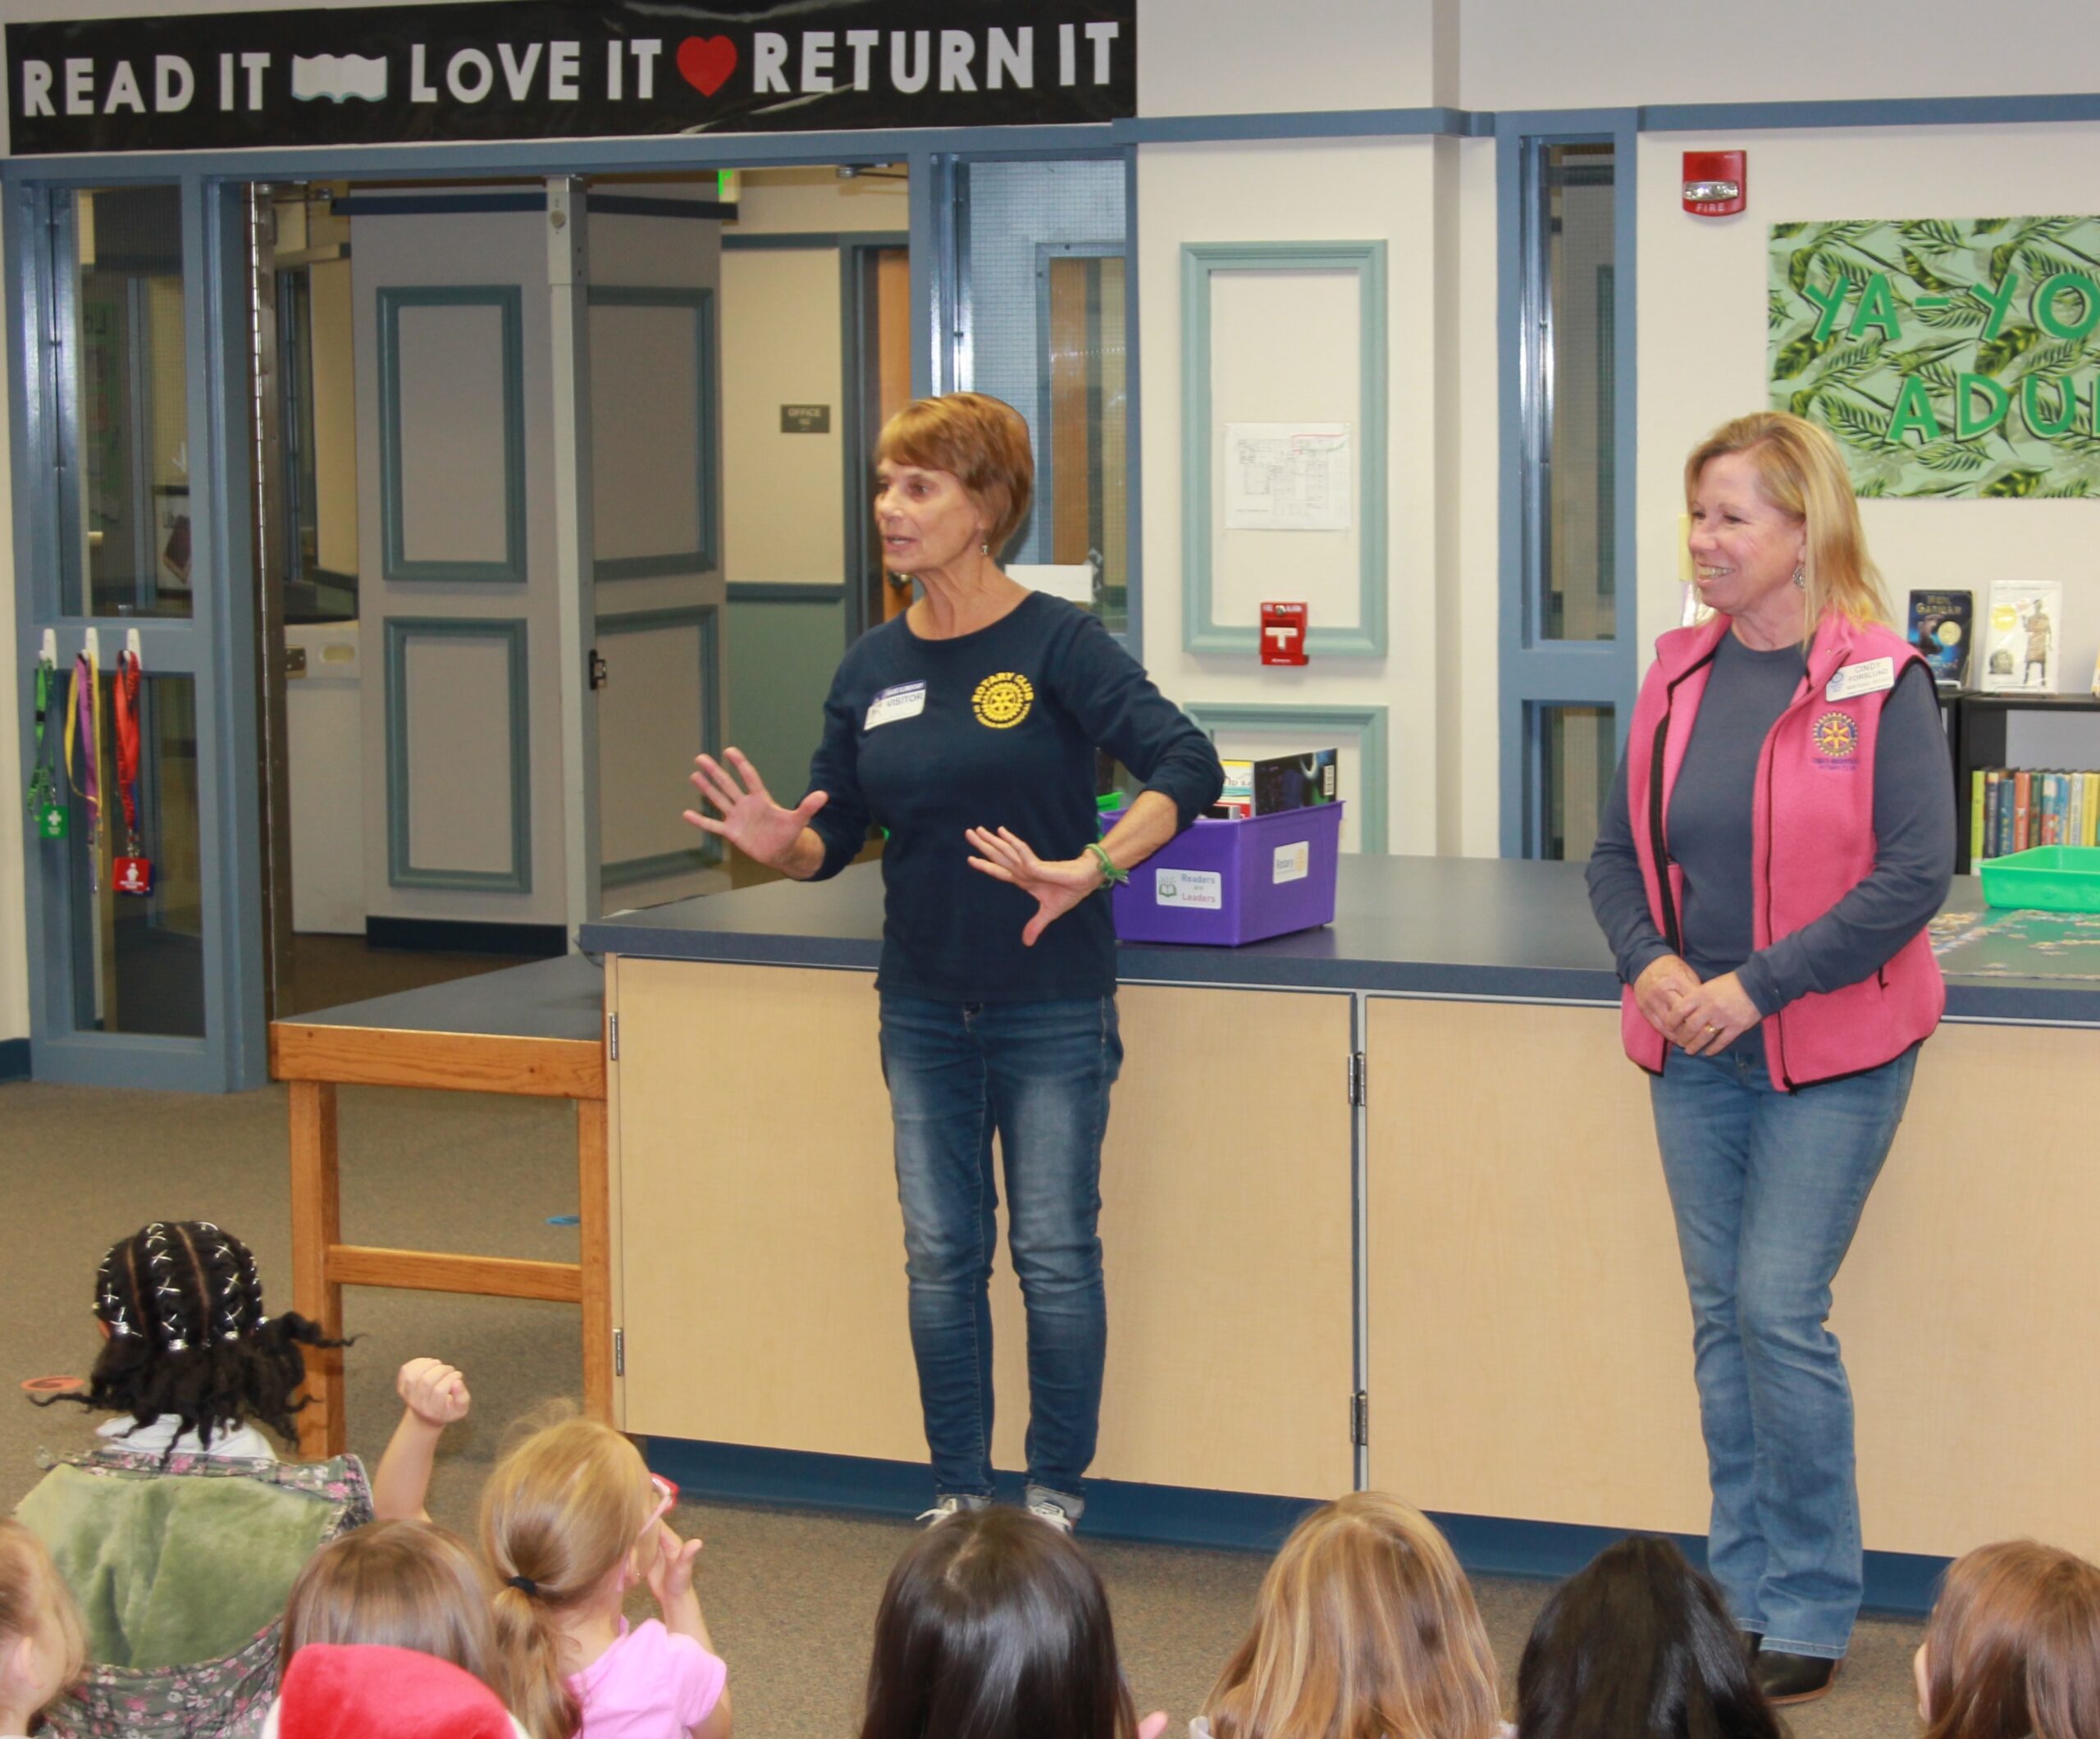 Rotarians talk about the Rotary Club to Gause students while presenting new classroom reading materials